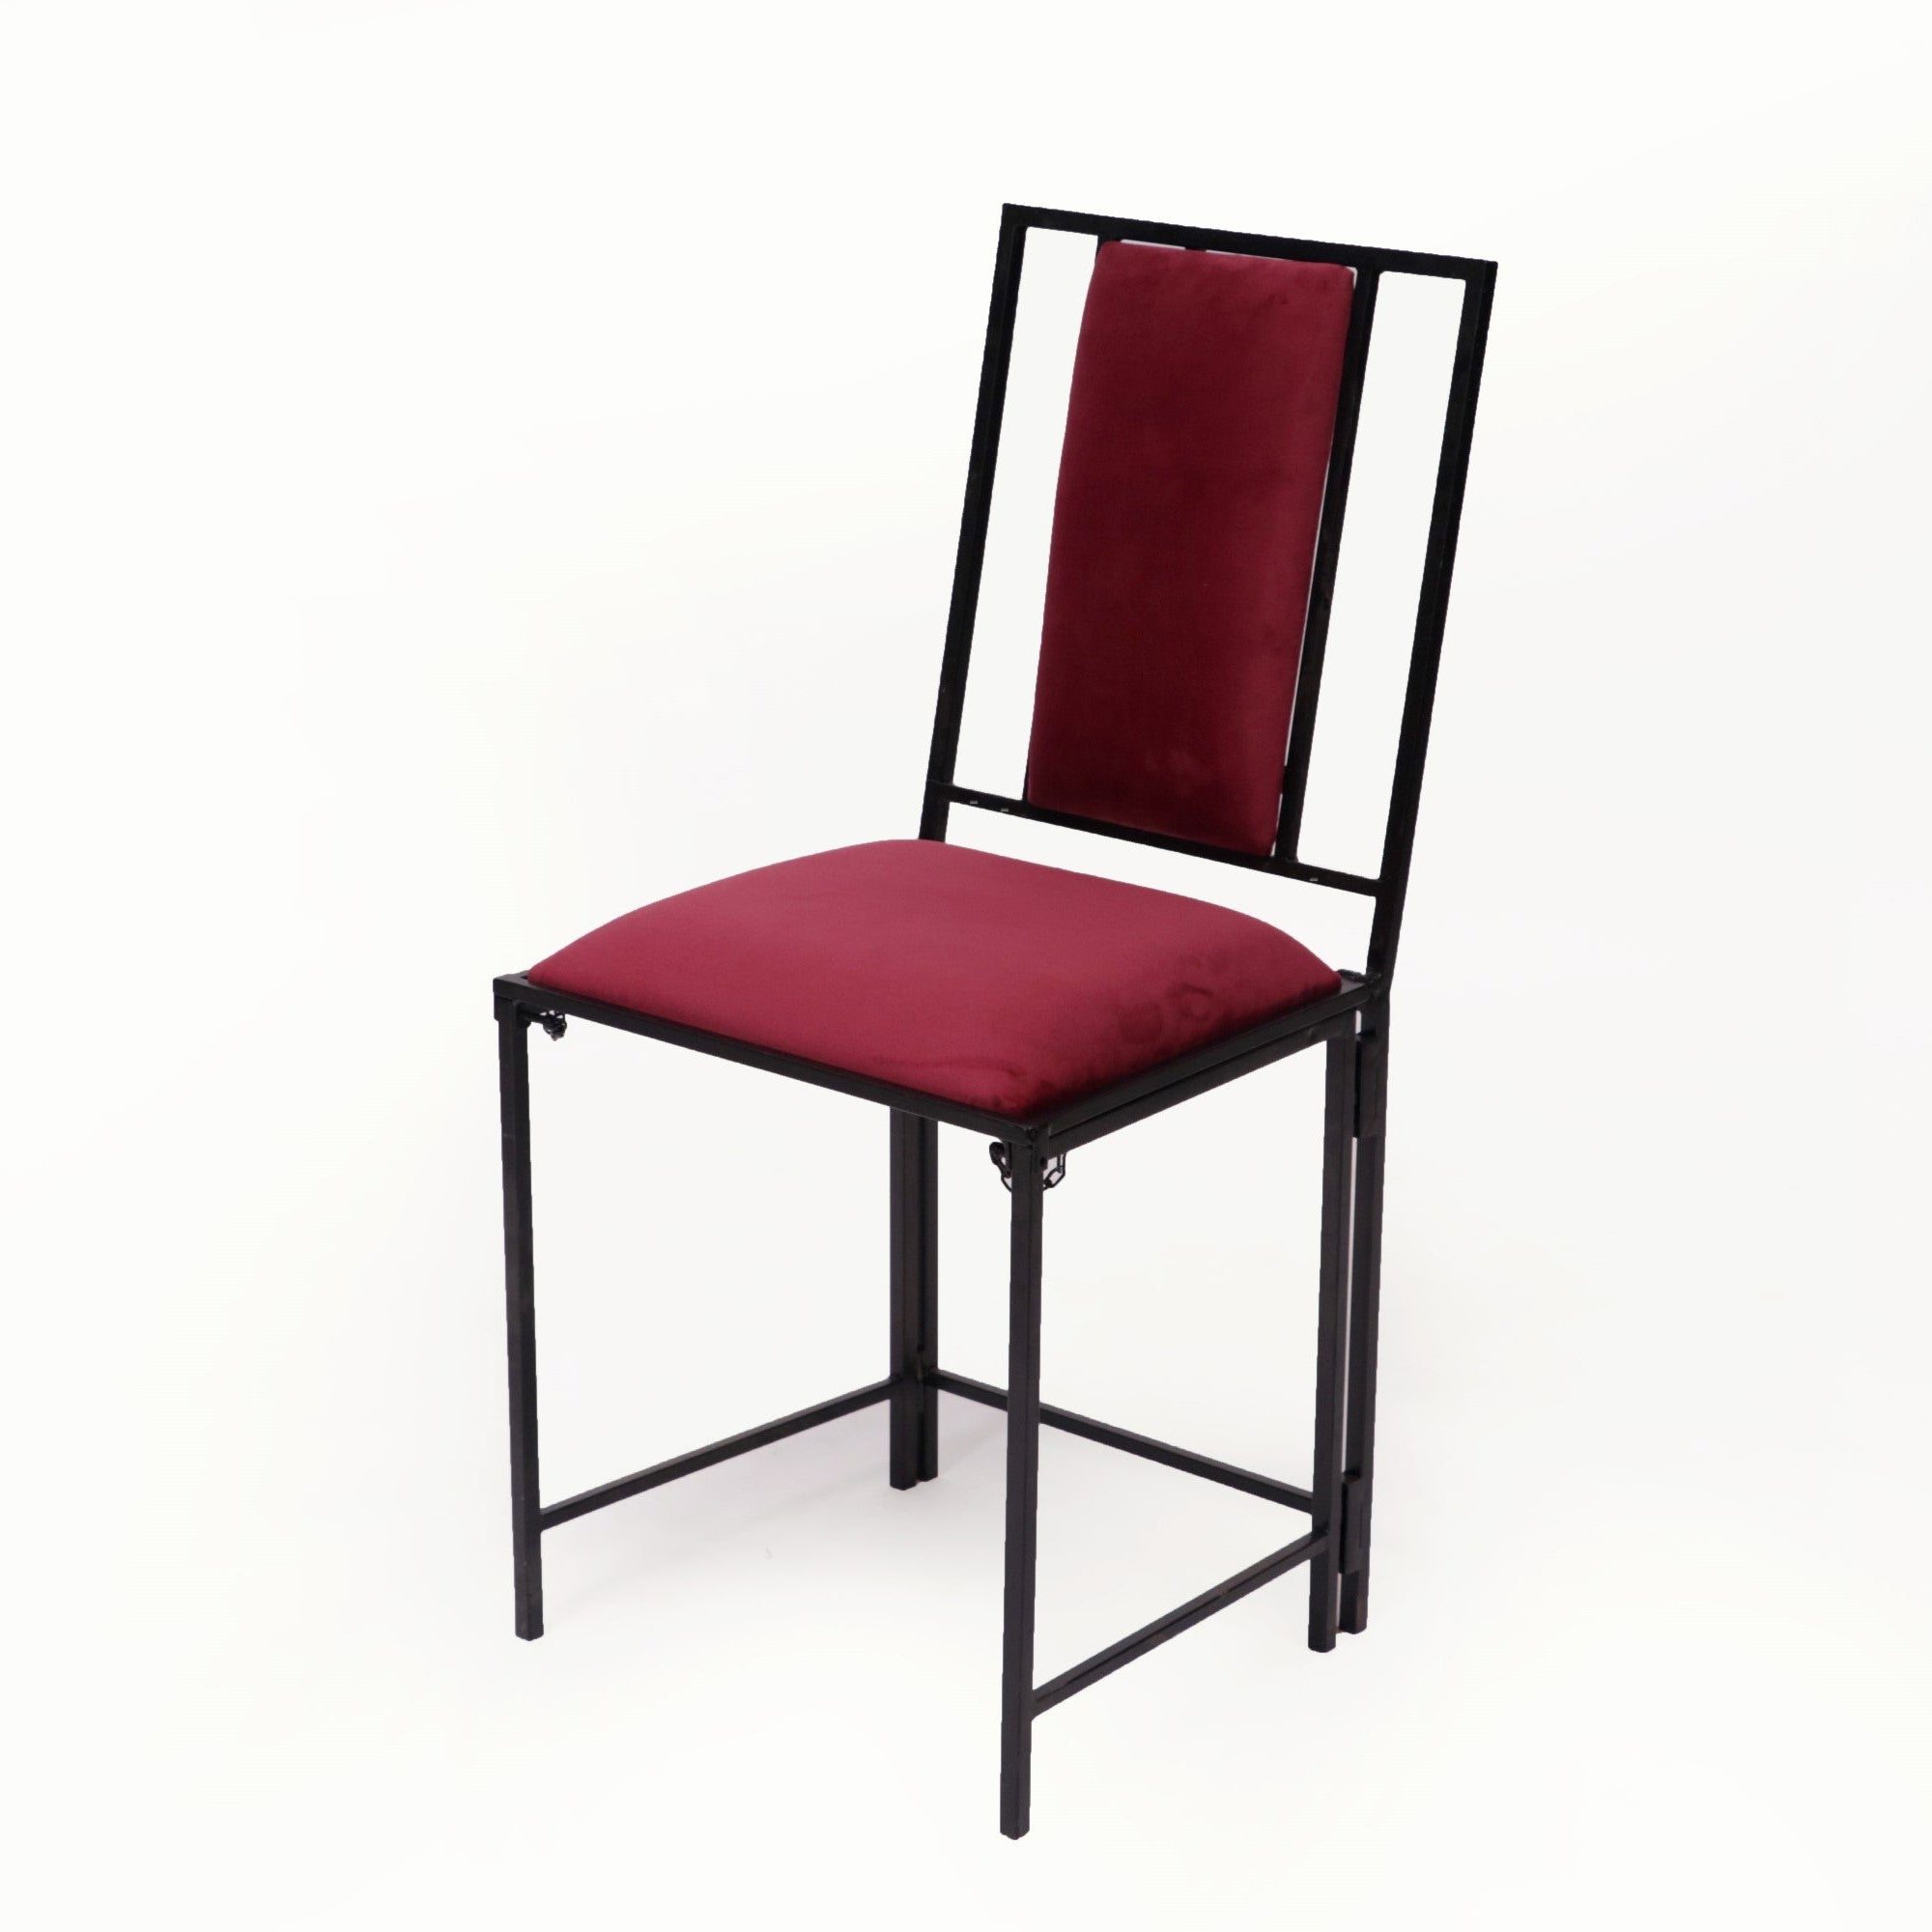 (Set of 2) Red upholstered Wooden Metallic Dinning Folding Chair Dining Chair